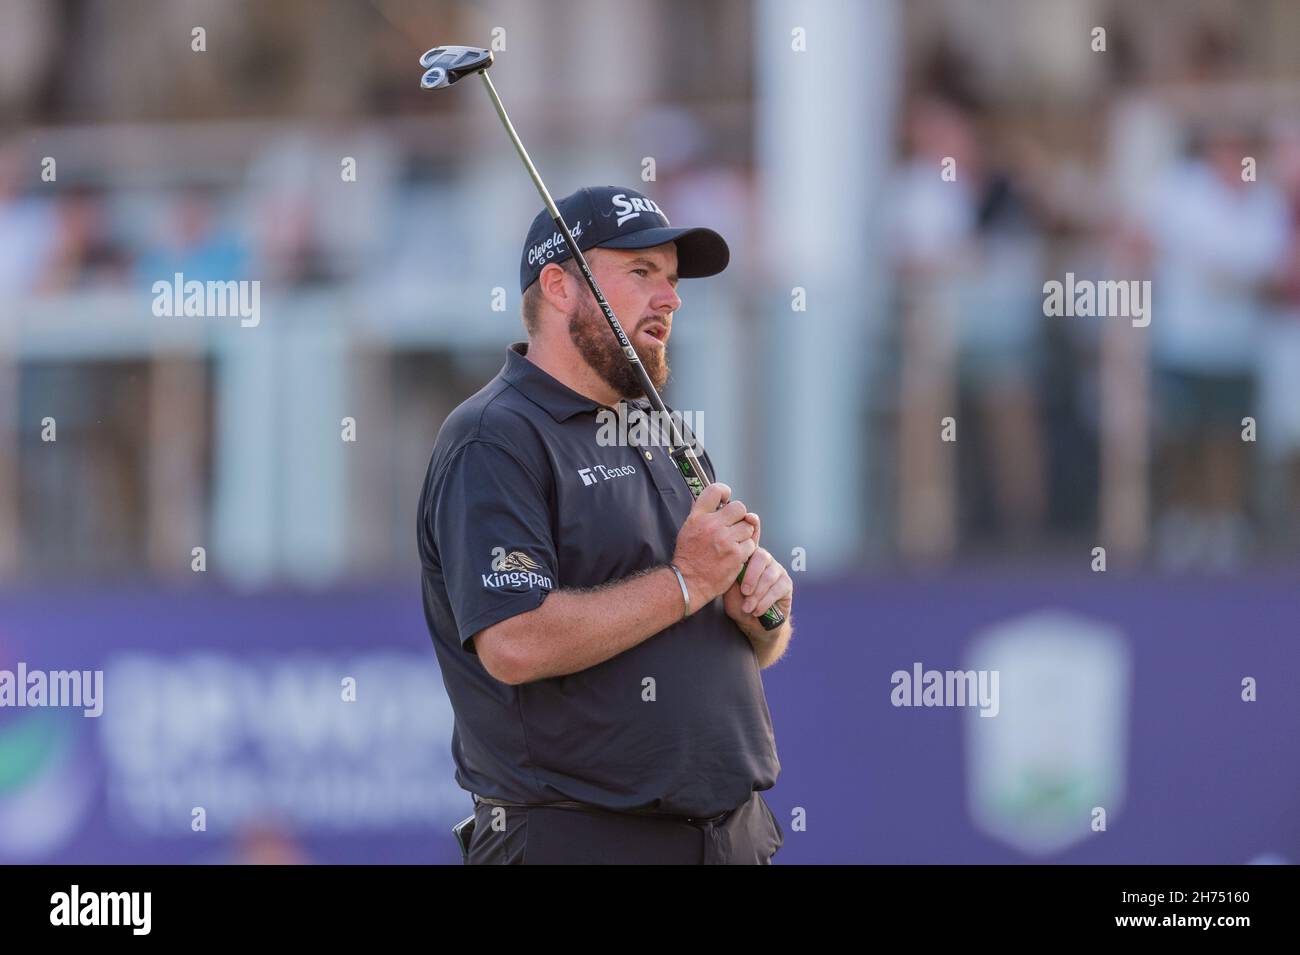 Shane Lowry of Ireland reacts as his putt slips past the hole at the eighteenth hole during the DP World Tour Championship day 3 at Jumeirah Golf Estates, Dubai, UAE on 20